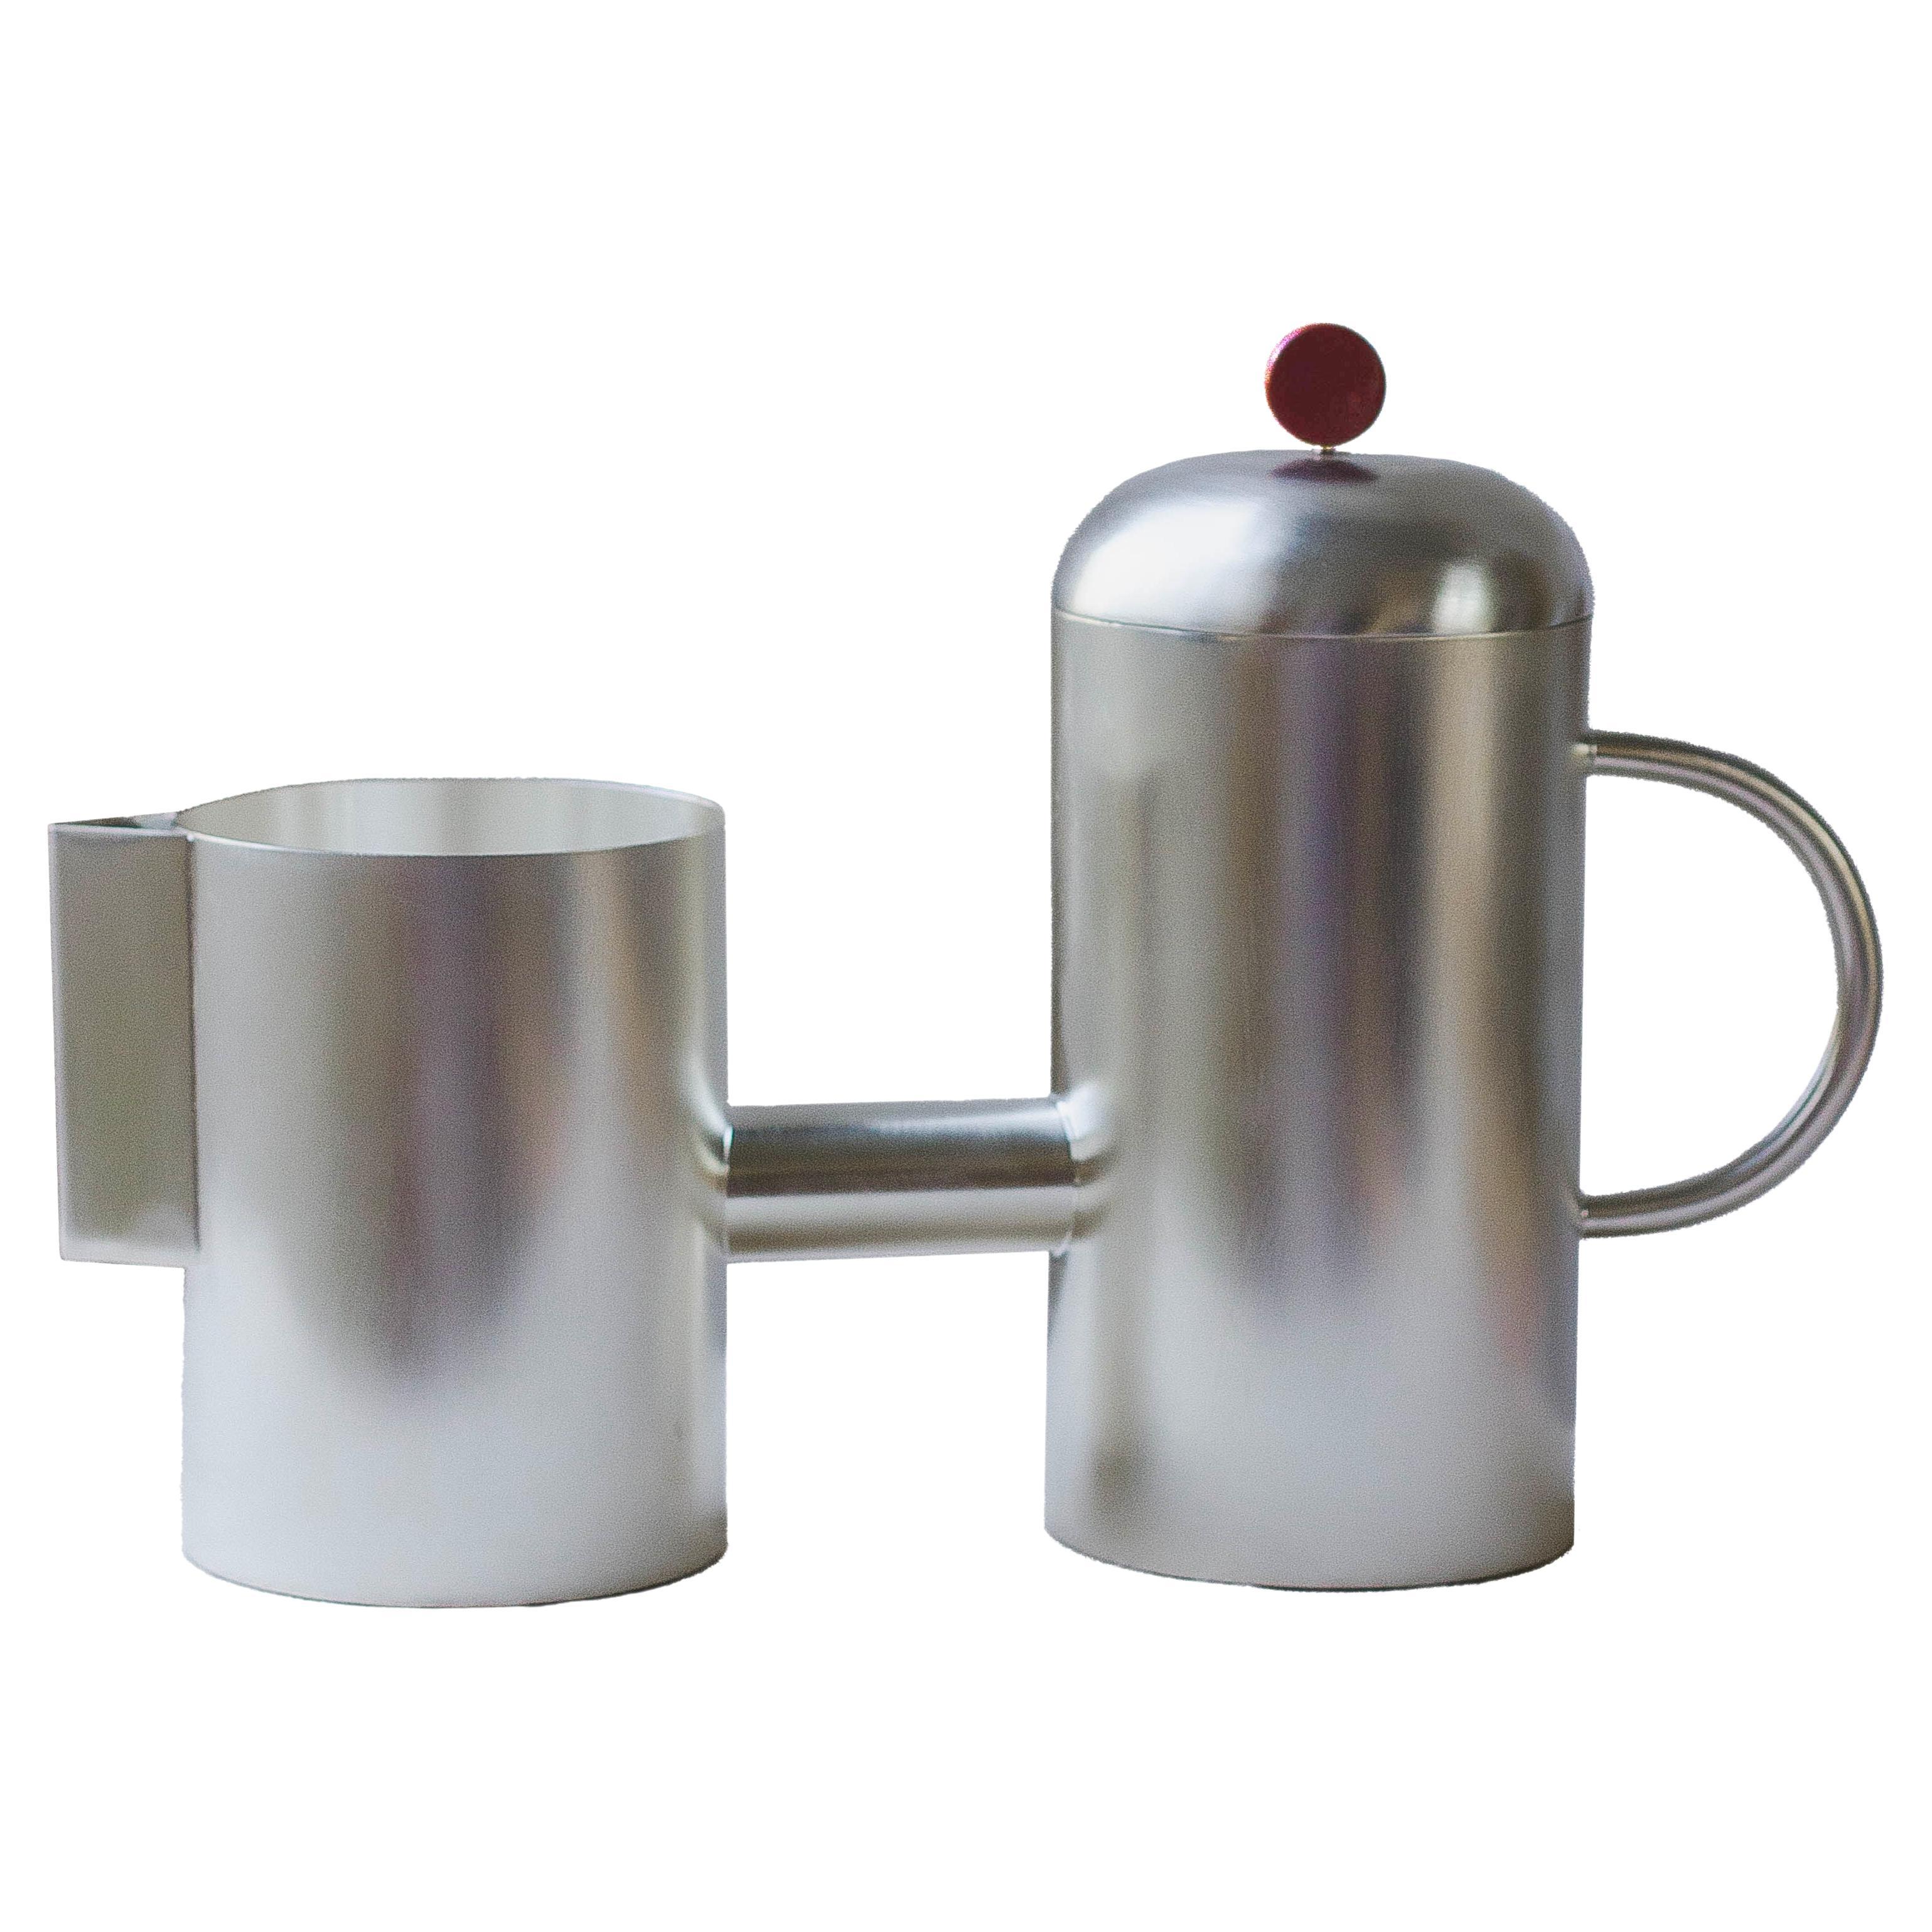 Contemporary Silver Plated Teapot Stone Handles Handcrafted Italy Natalia Criado For Sale